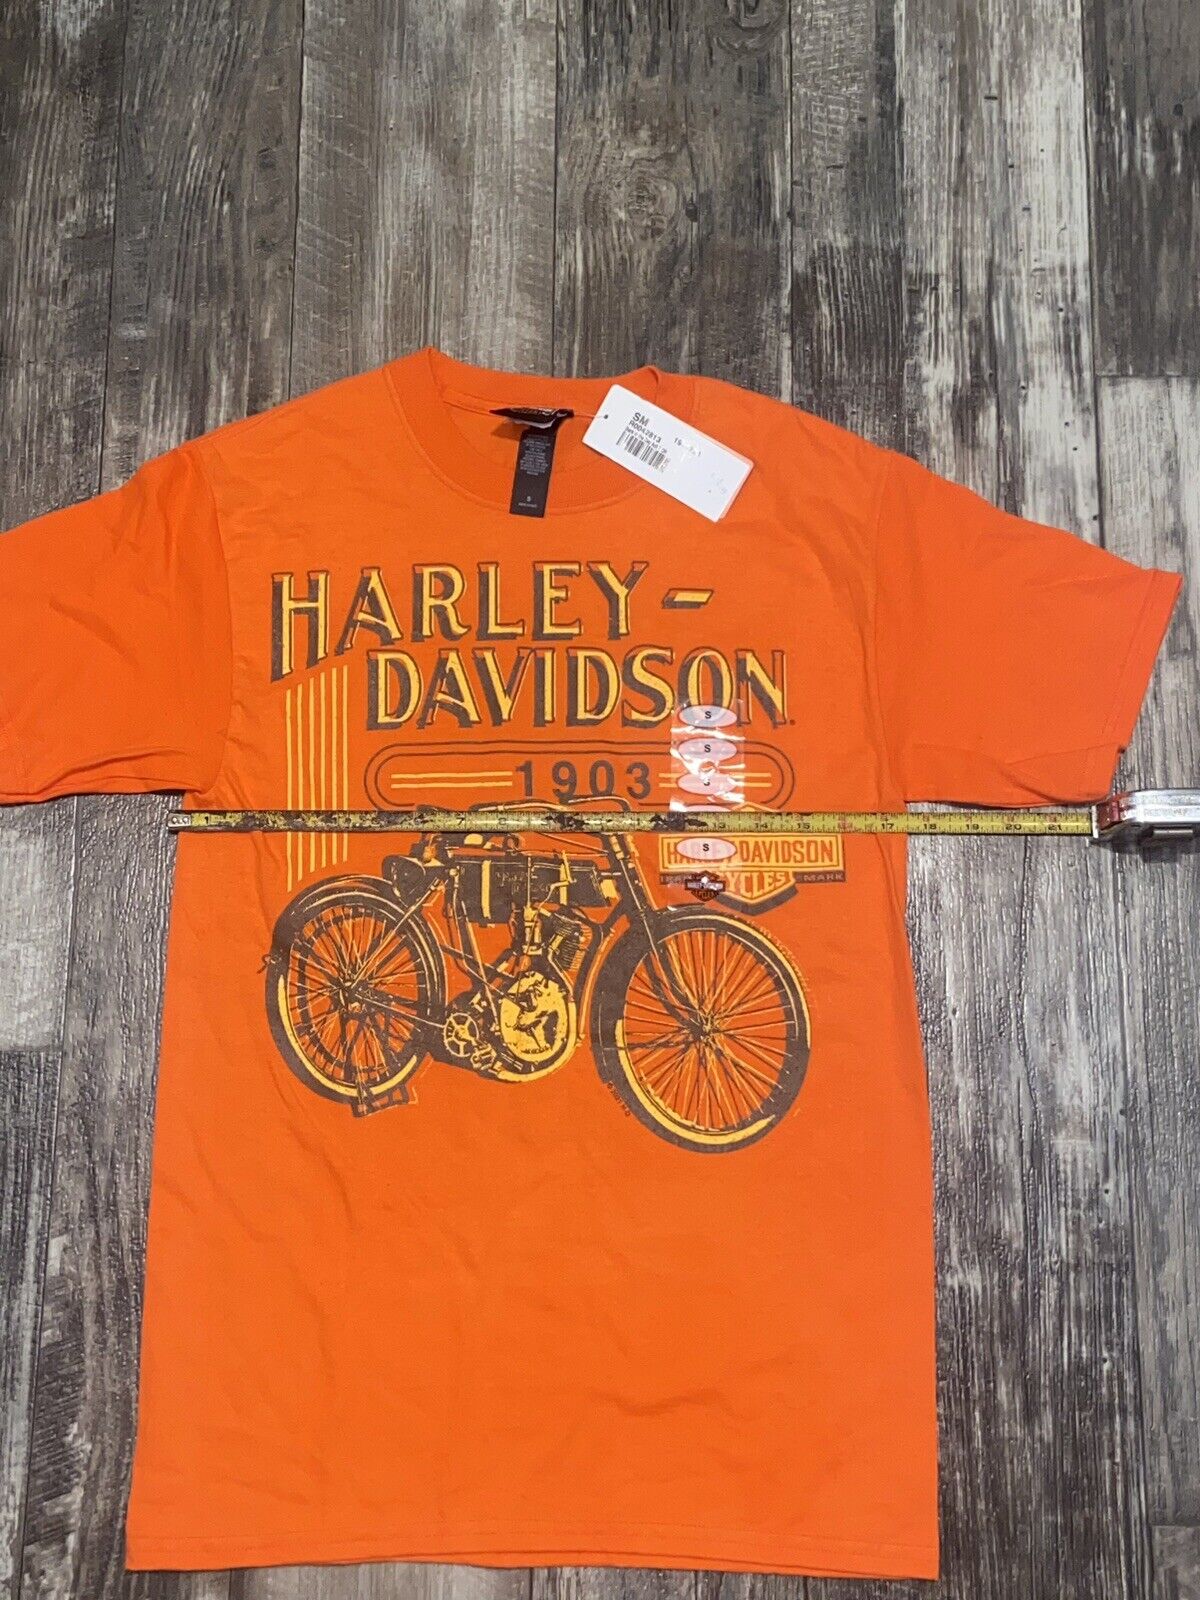 2021 Harley Davidson Gainesville Florida Size Small Brand New With Tags